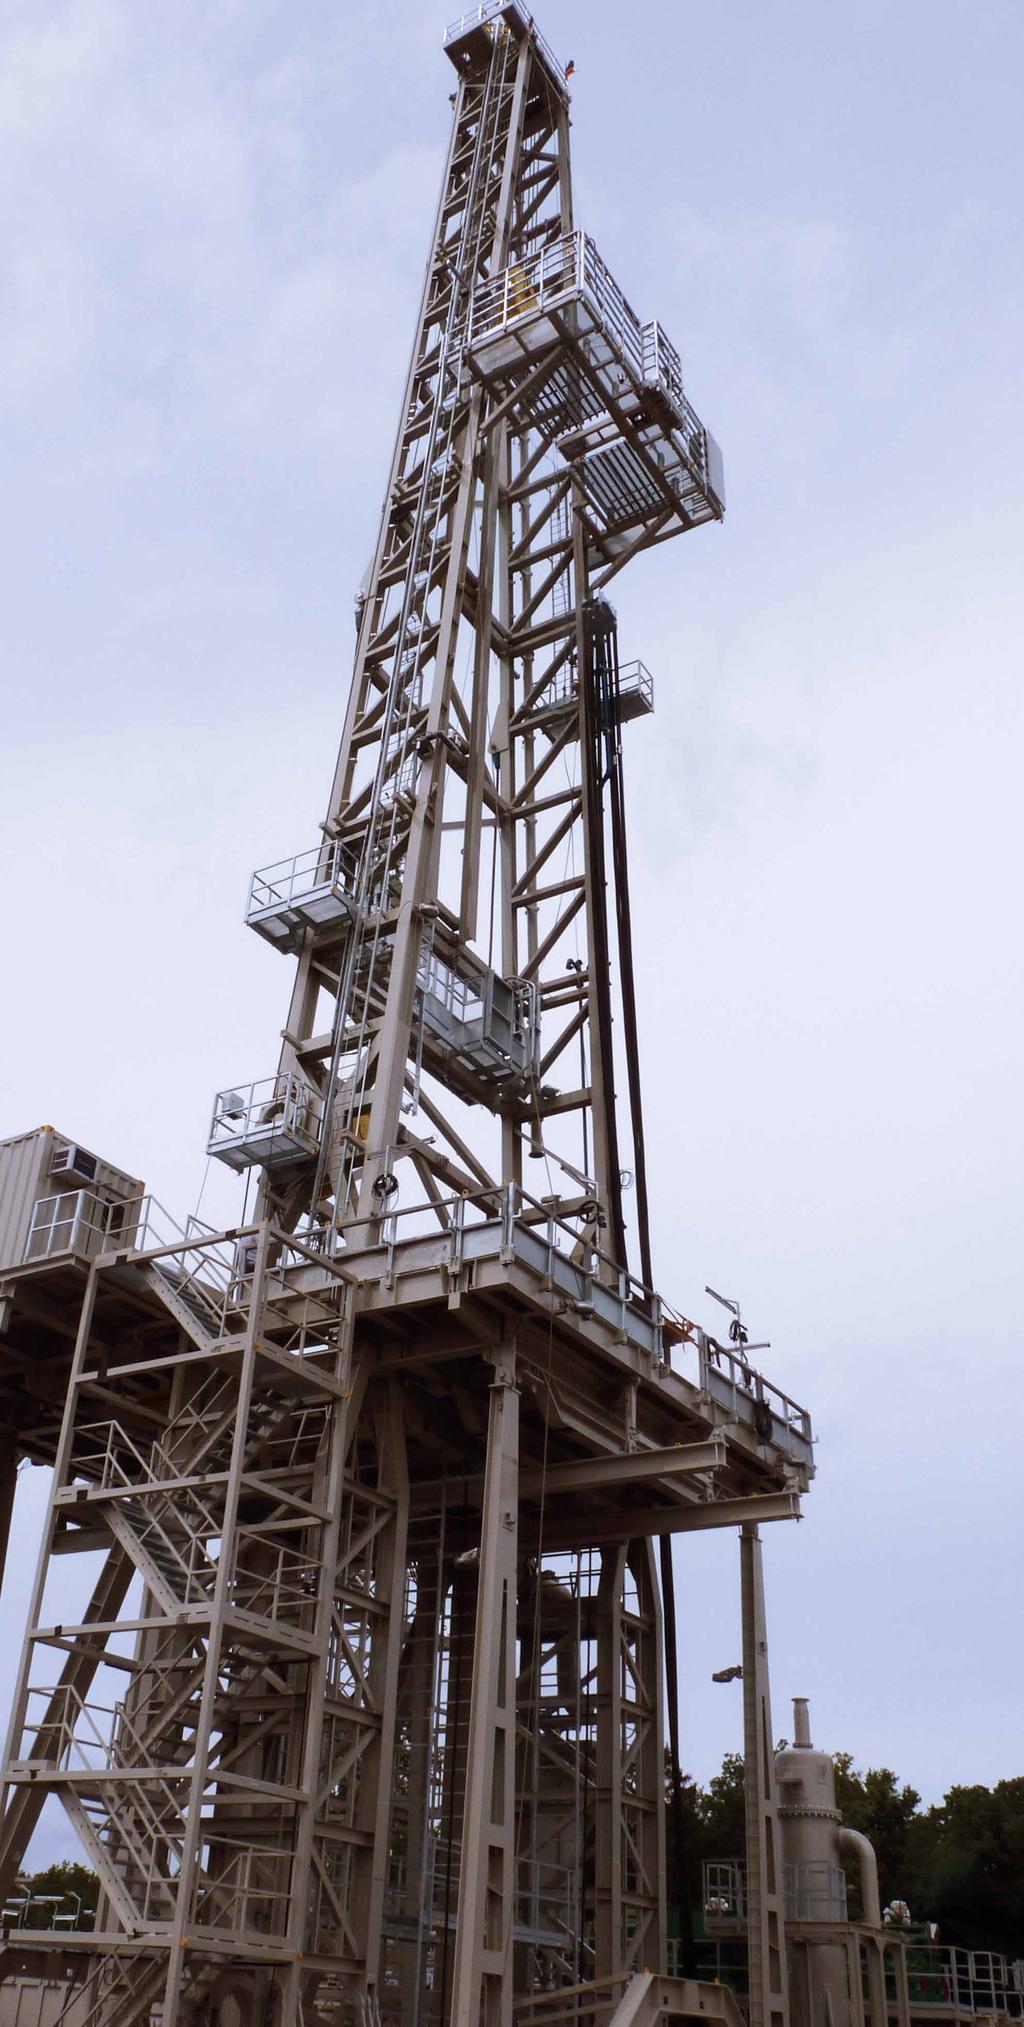 Details of the onshore rig: Location: Rig type: Control: Drilling depth: Hook load: